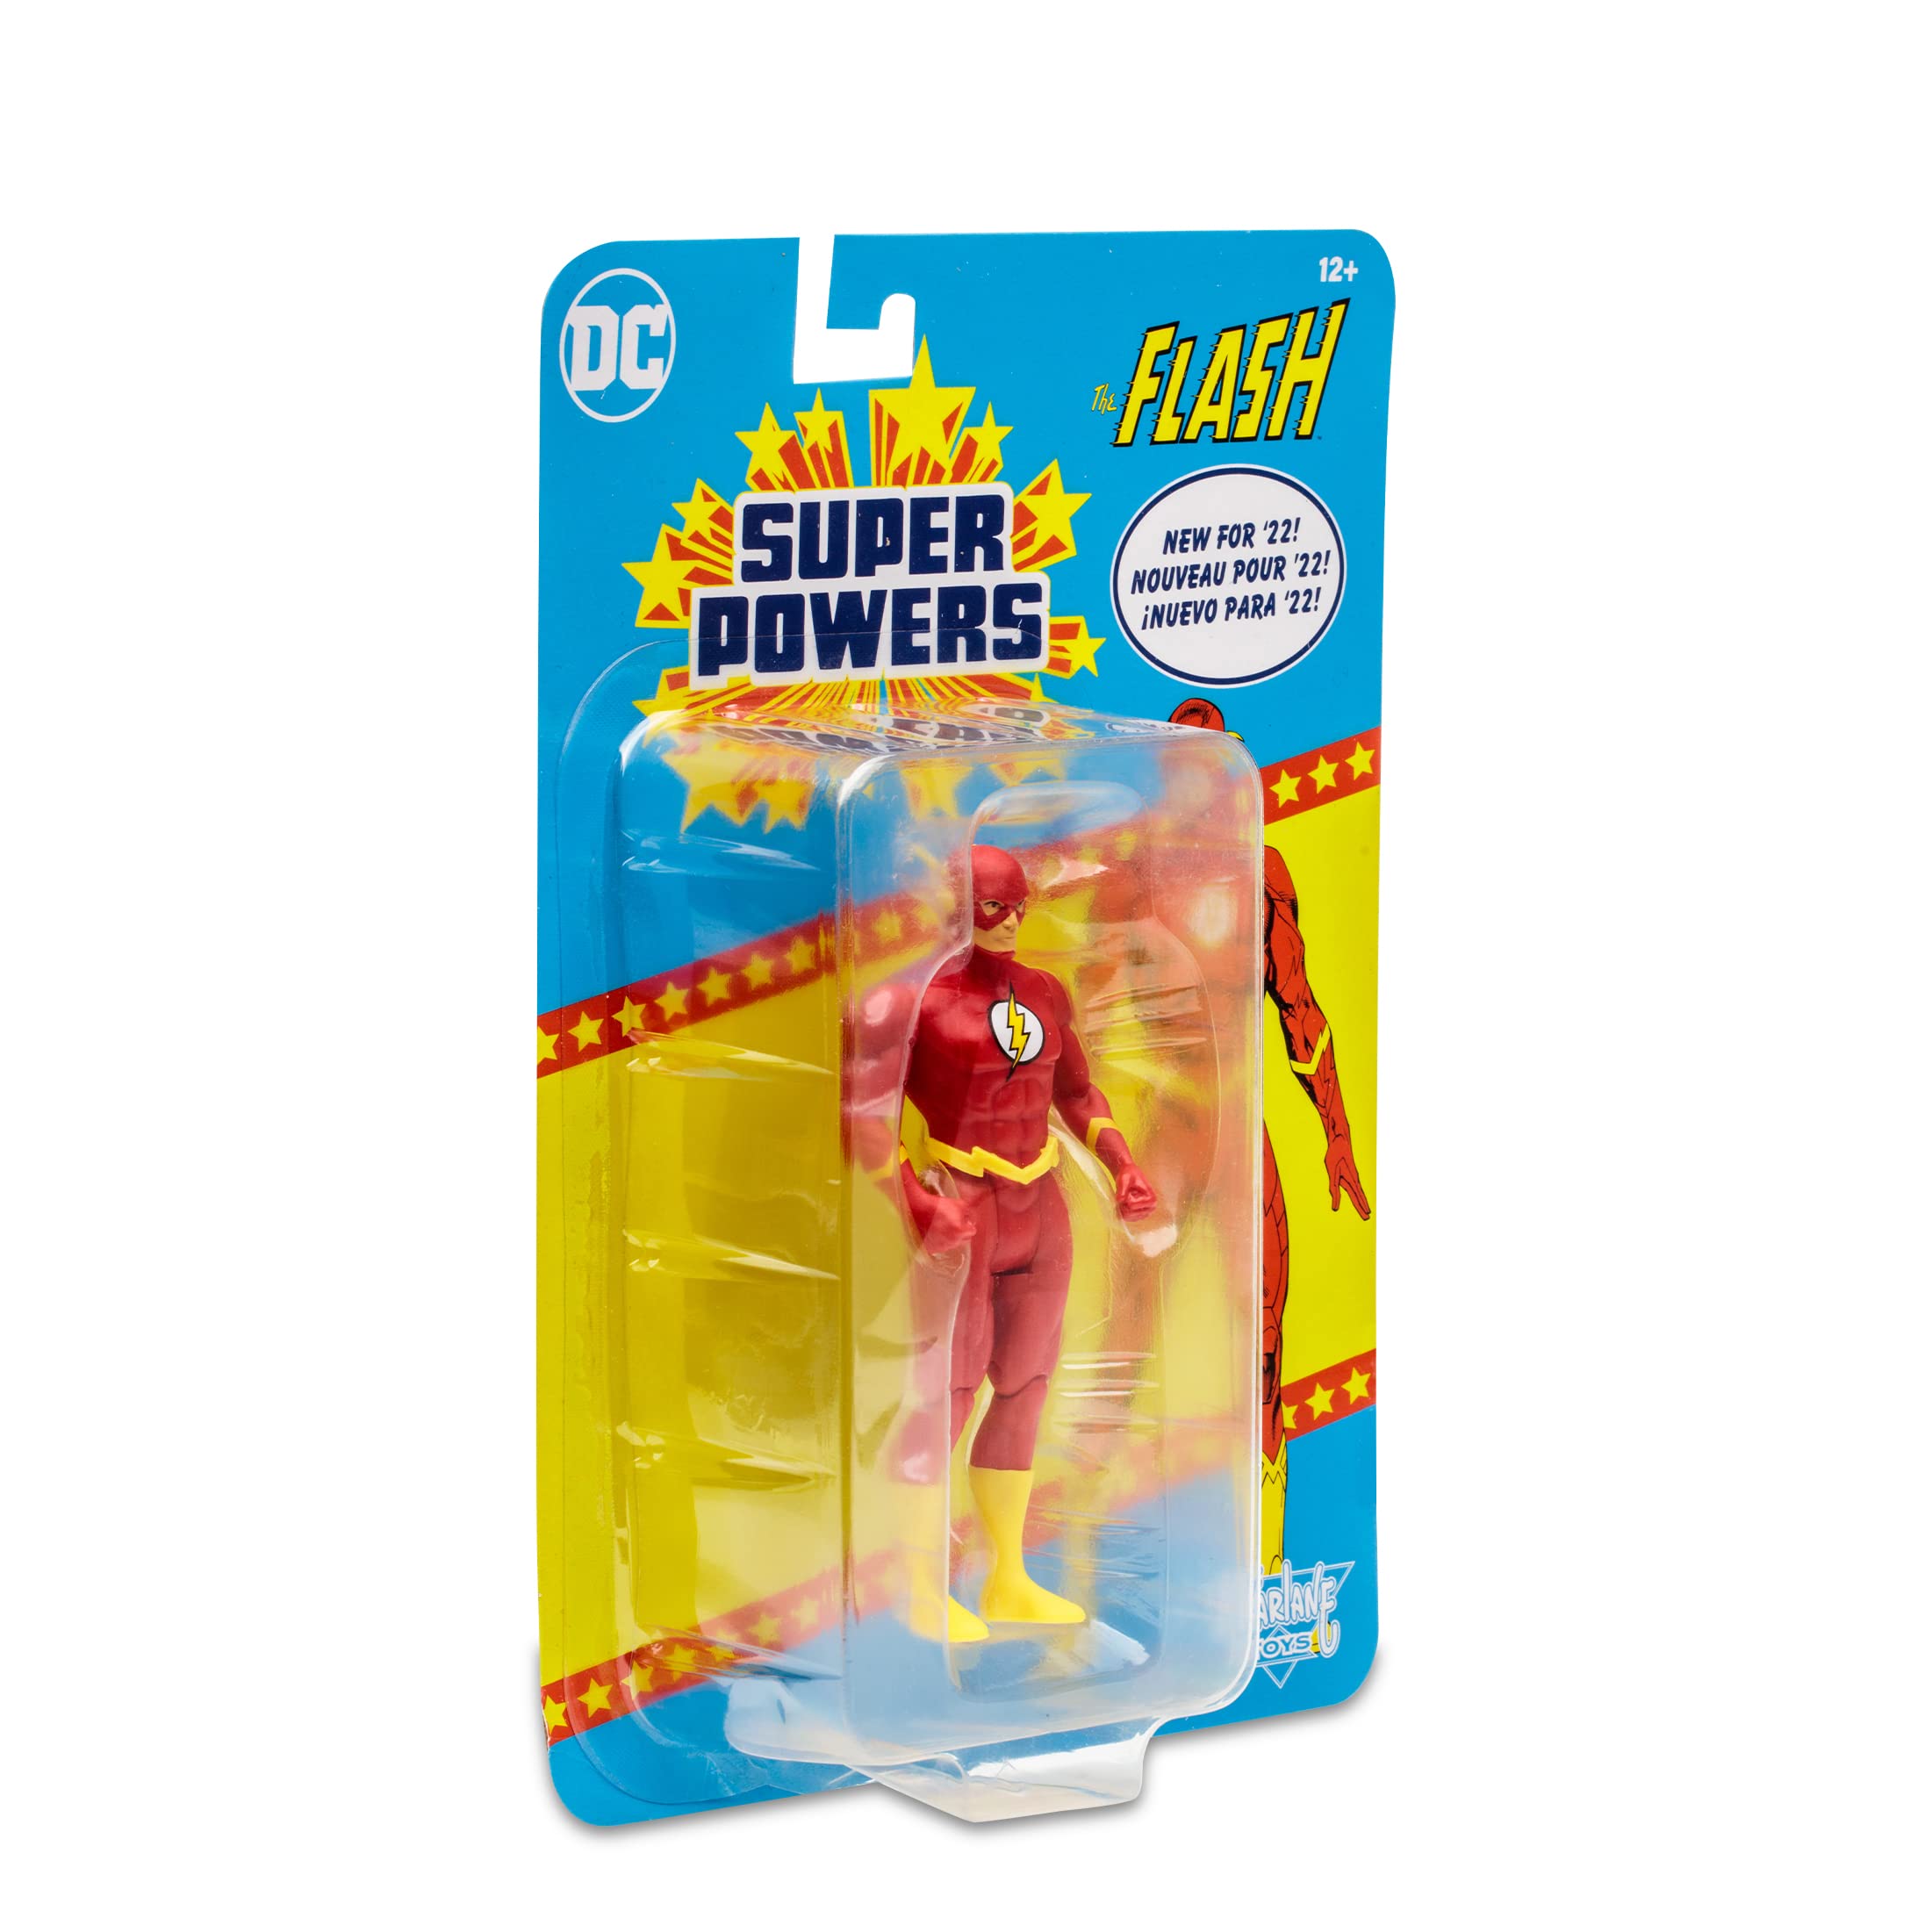 McFarlane Toys, DC Multiverse, 5-inch DC Rebirth Super Powers The Flash Action Figure with 5 Points of articulations, Collectible DC Retro 1980’s Super Powers Line Figure – Ages 12+